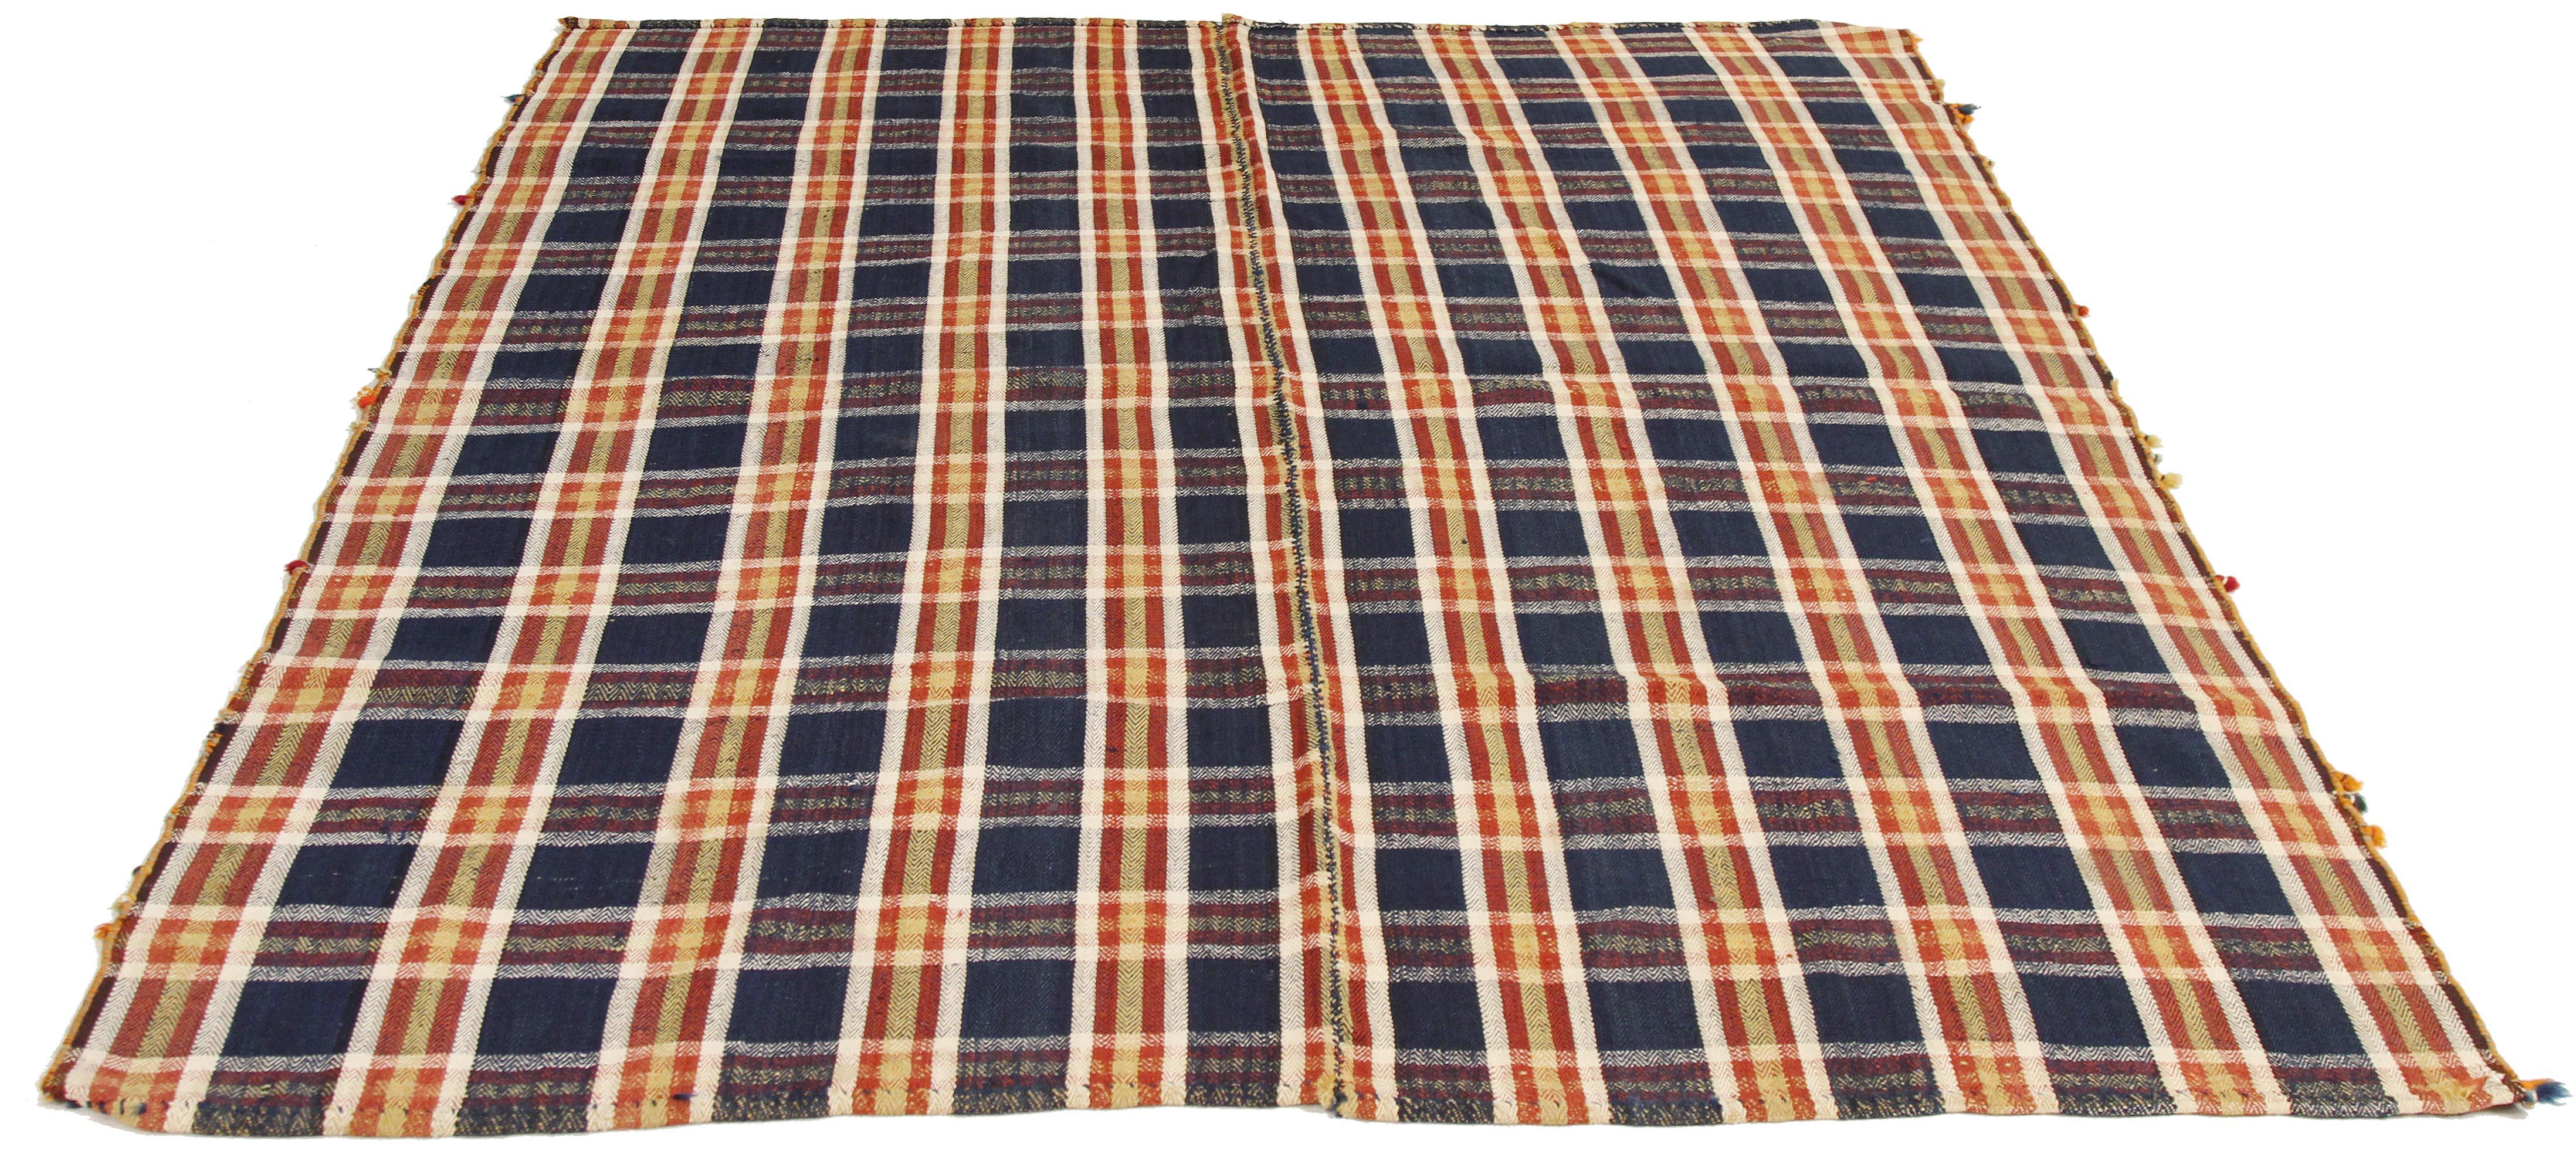 Antique Persian rug handwoven from the finest sheep’s wool and colored with all-natural vegetable dyes that are safe for humans and pets. It’s a traditional Jajim flat-weave design featuring navy and yellow chequered patterns. It’s a stunning piece